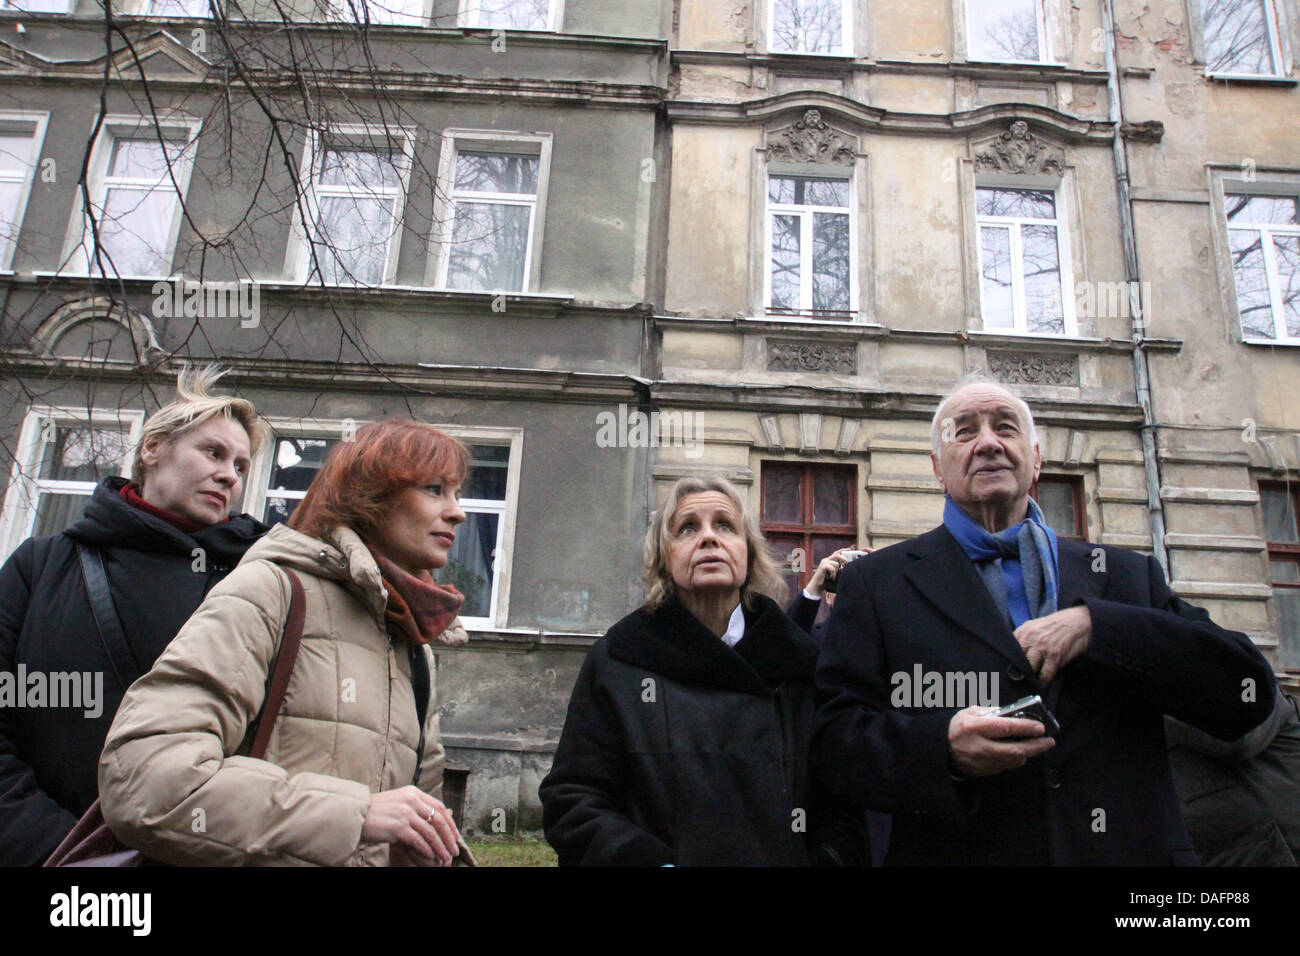 German actor Armin Mueller-Stahl (R) and his wife Gabriele (2-R) stand in front of the former home of his parents in his city of birth 'Tilsit', Sovetsk today, situated in the Russian federal district Kaliningrad, Russia, 07 December 2011. The artist and actor visited the city for the first time in 73 years to receive an award as honorary citizen of the town on 07 December 2011. Ph Stock Photo